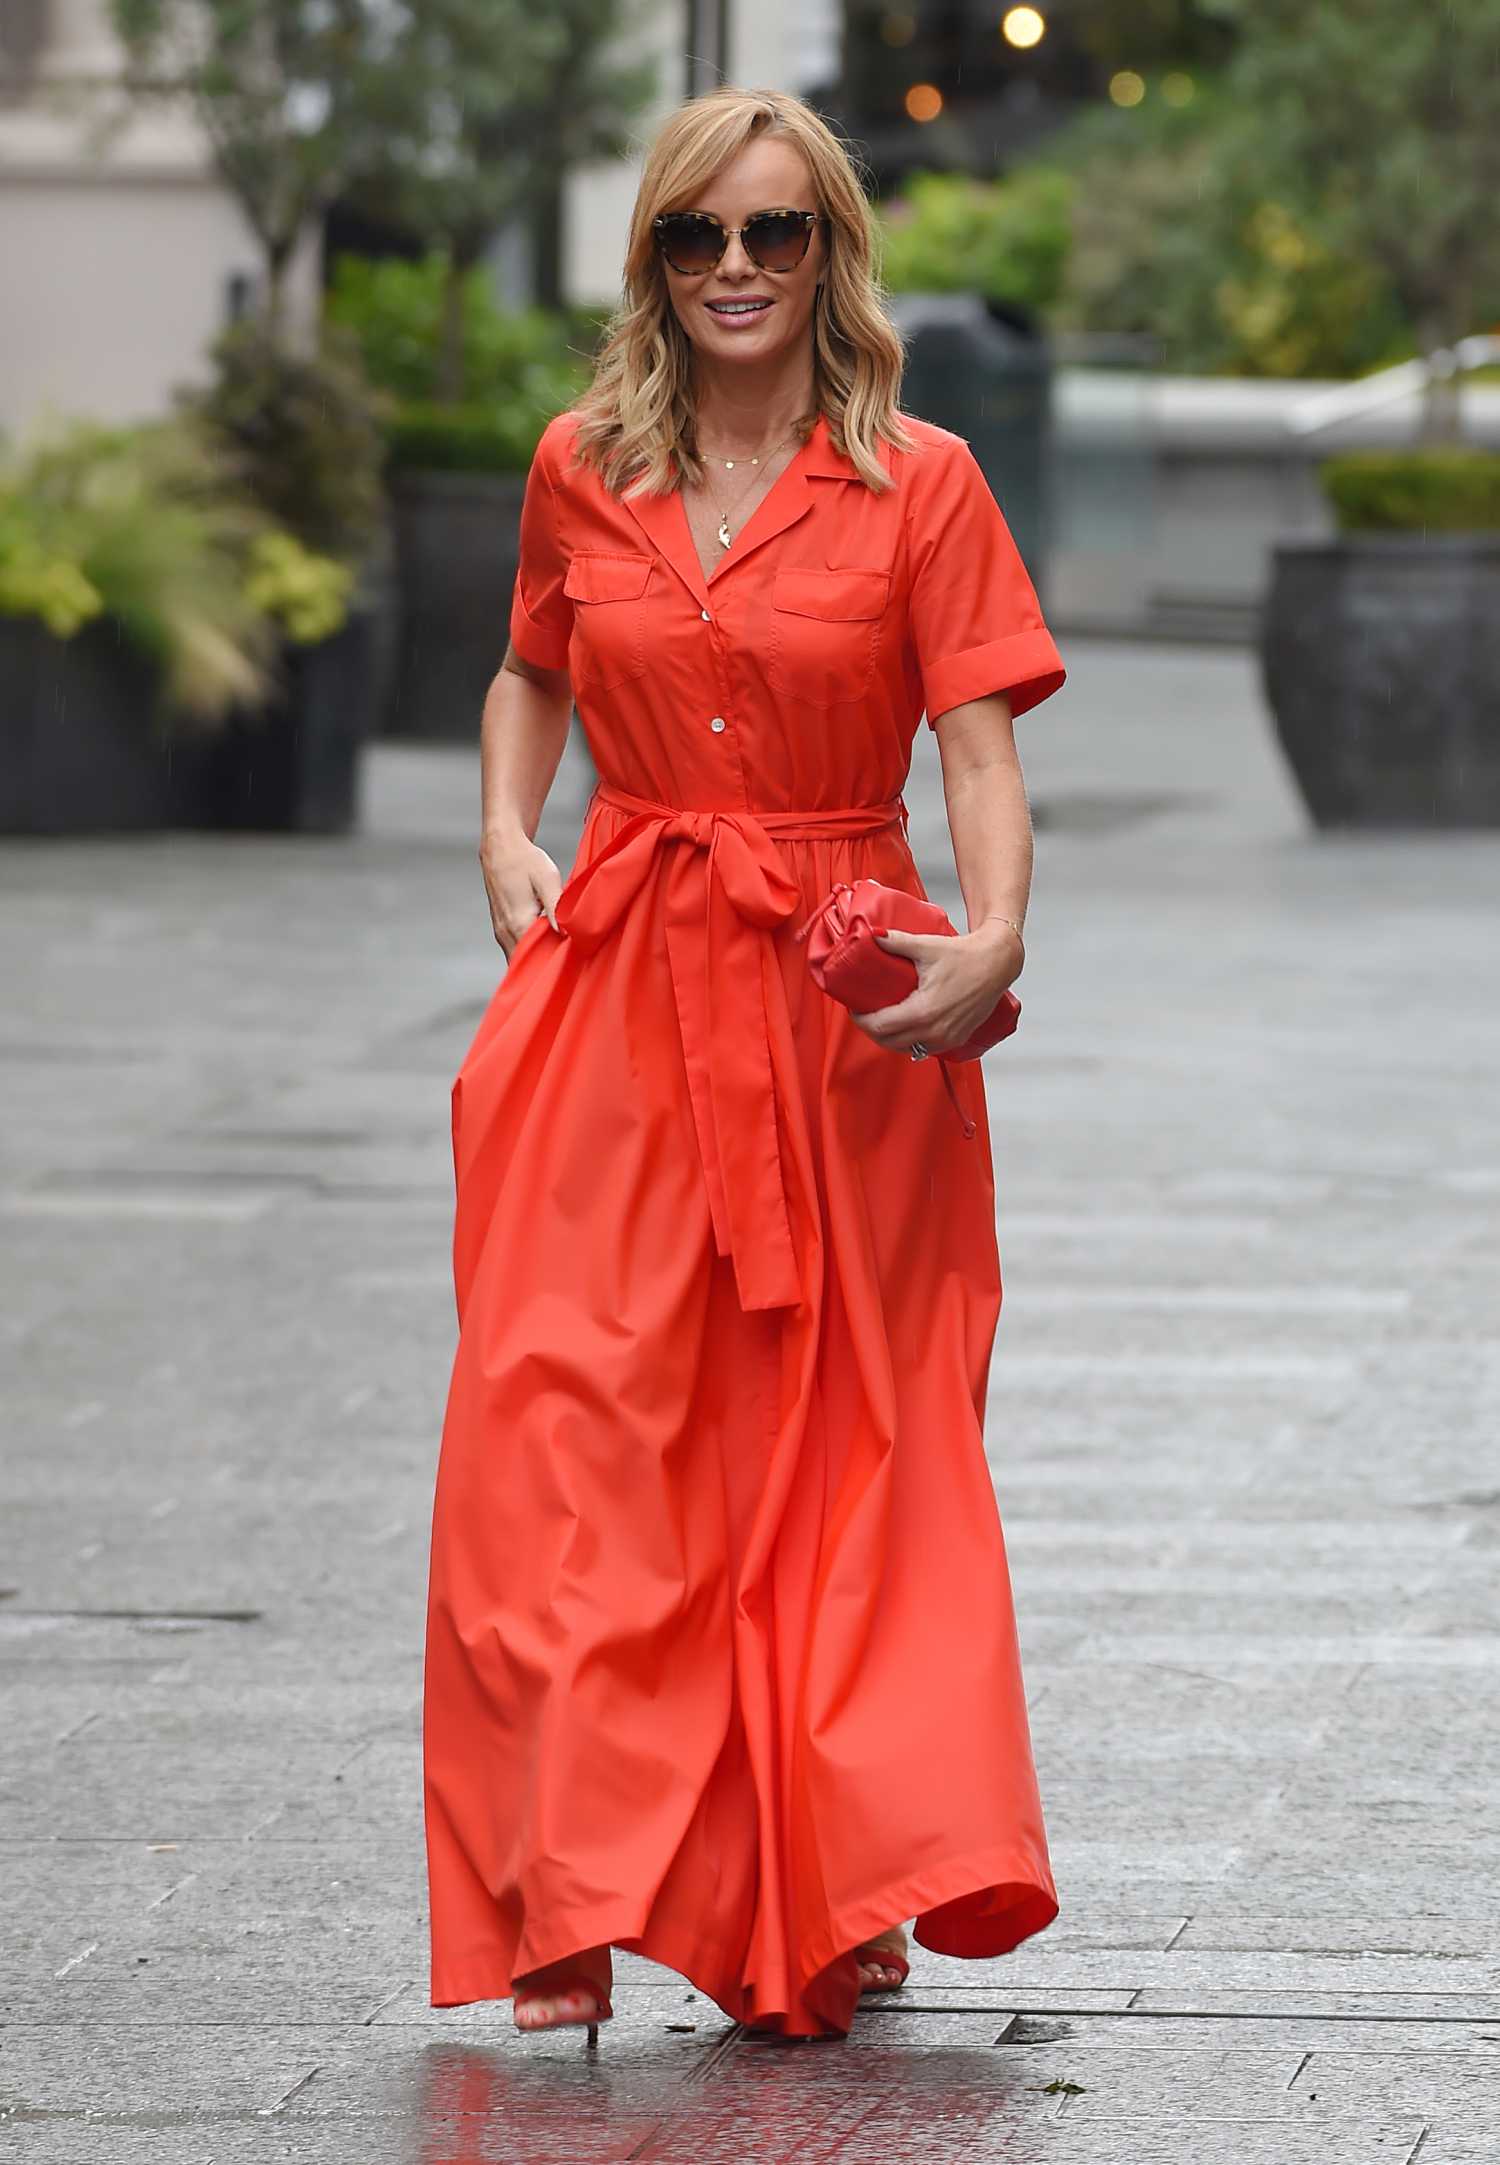 Amanda Holden in a Red Dress Leaves the Global Studios in London ...